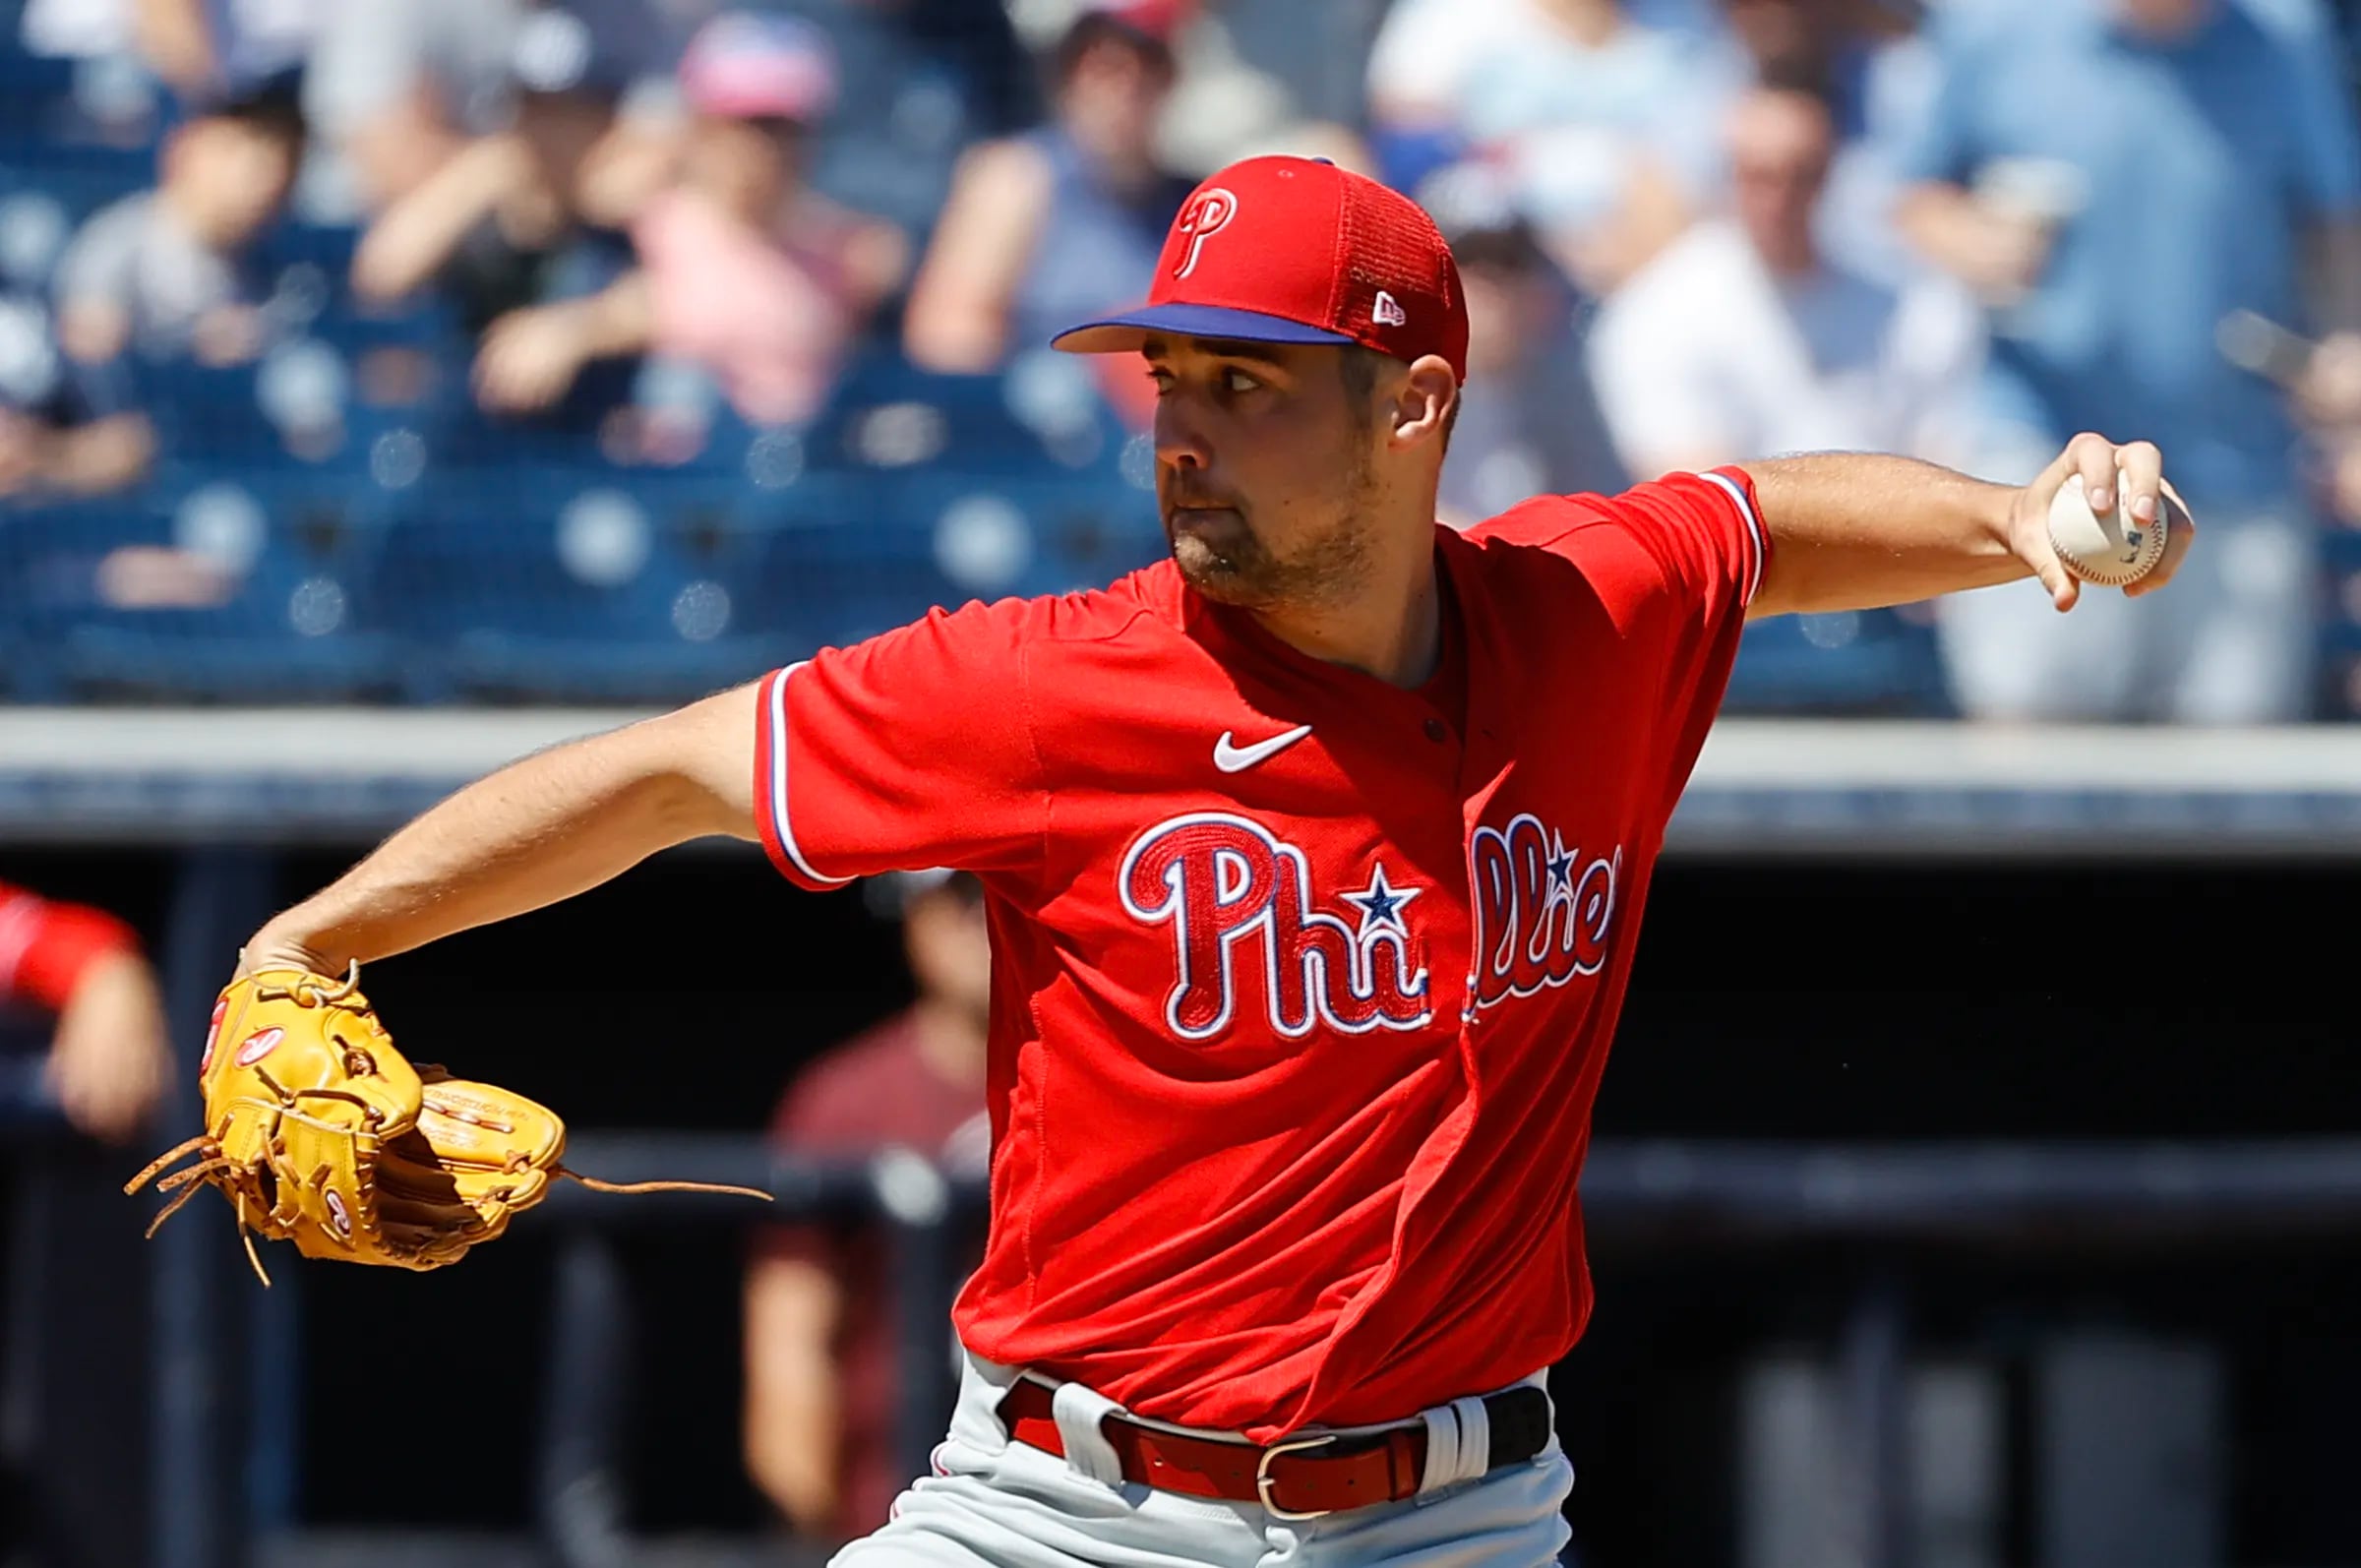 Photos from the Phillies spring training game win over the Yankees